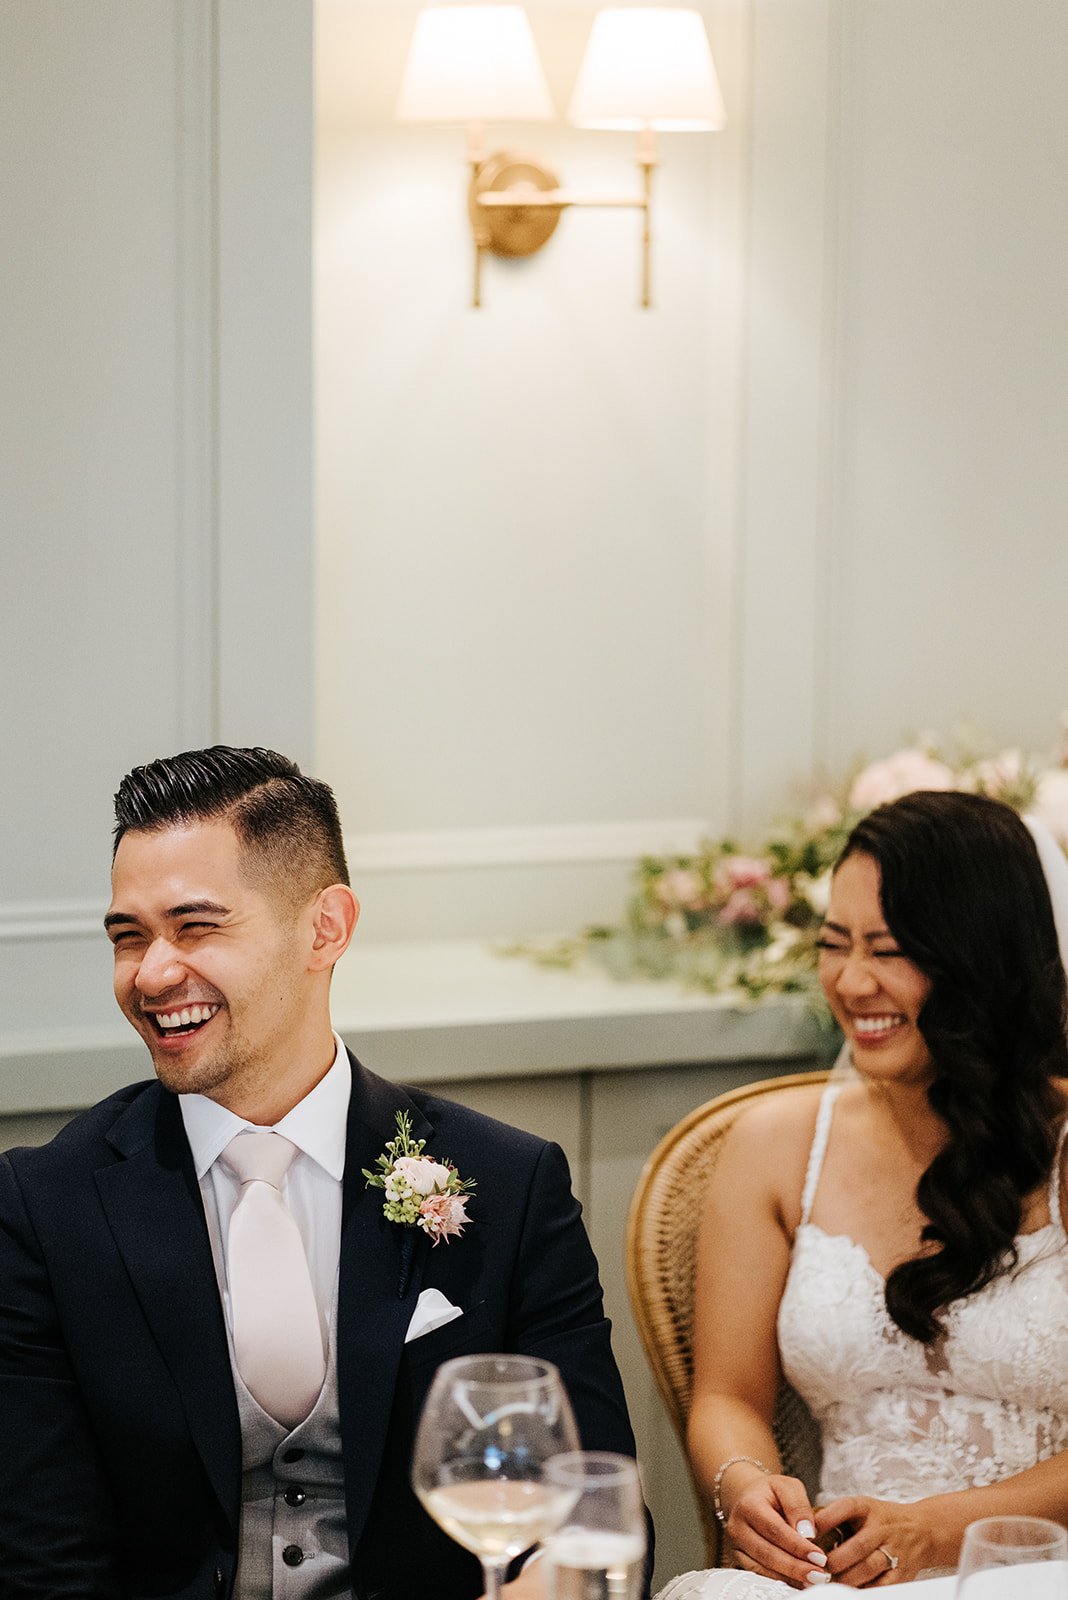 Close-up photo of bride and groom sat down during speeches and cackling with laughter